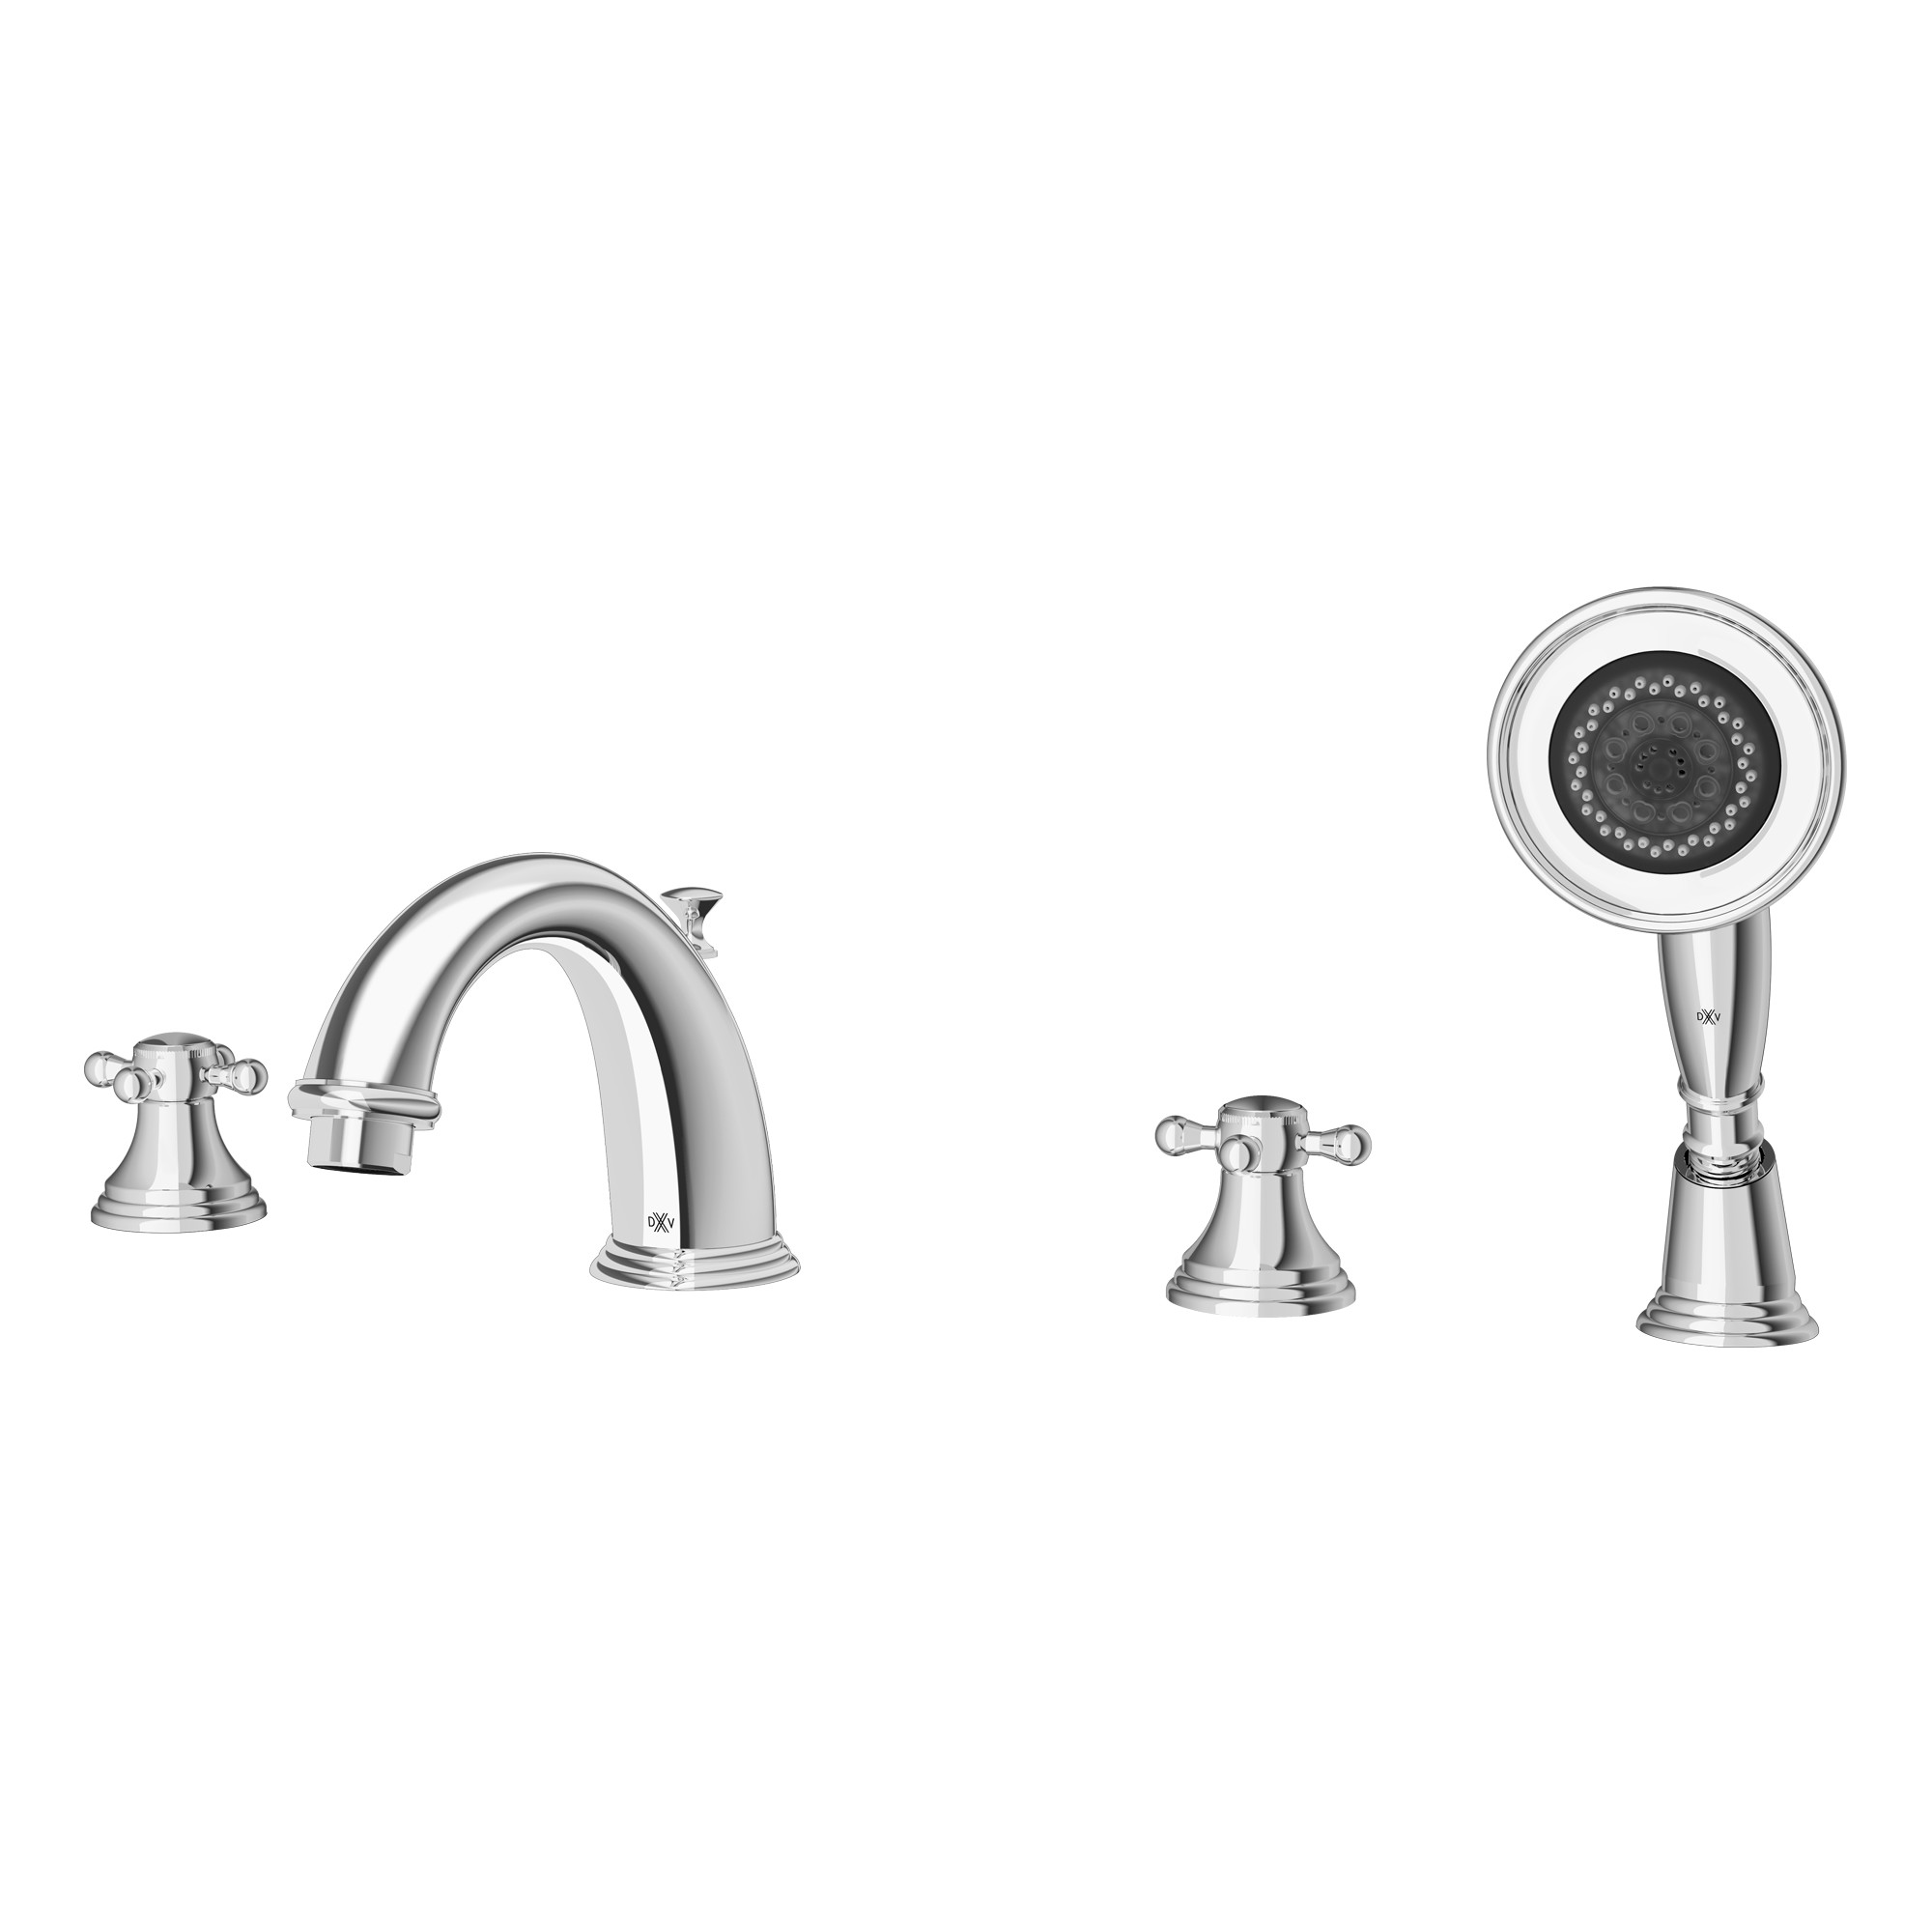 Ashbee 2-Handle Deck Mount Bathtub Faucet with Hand Shower and Cross Handles